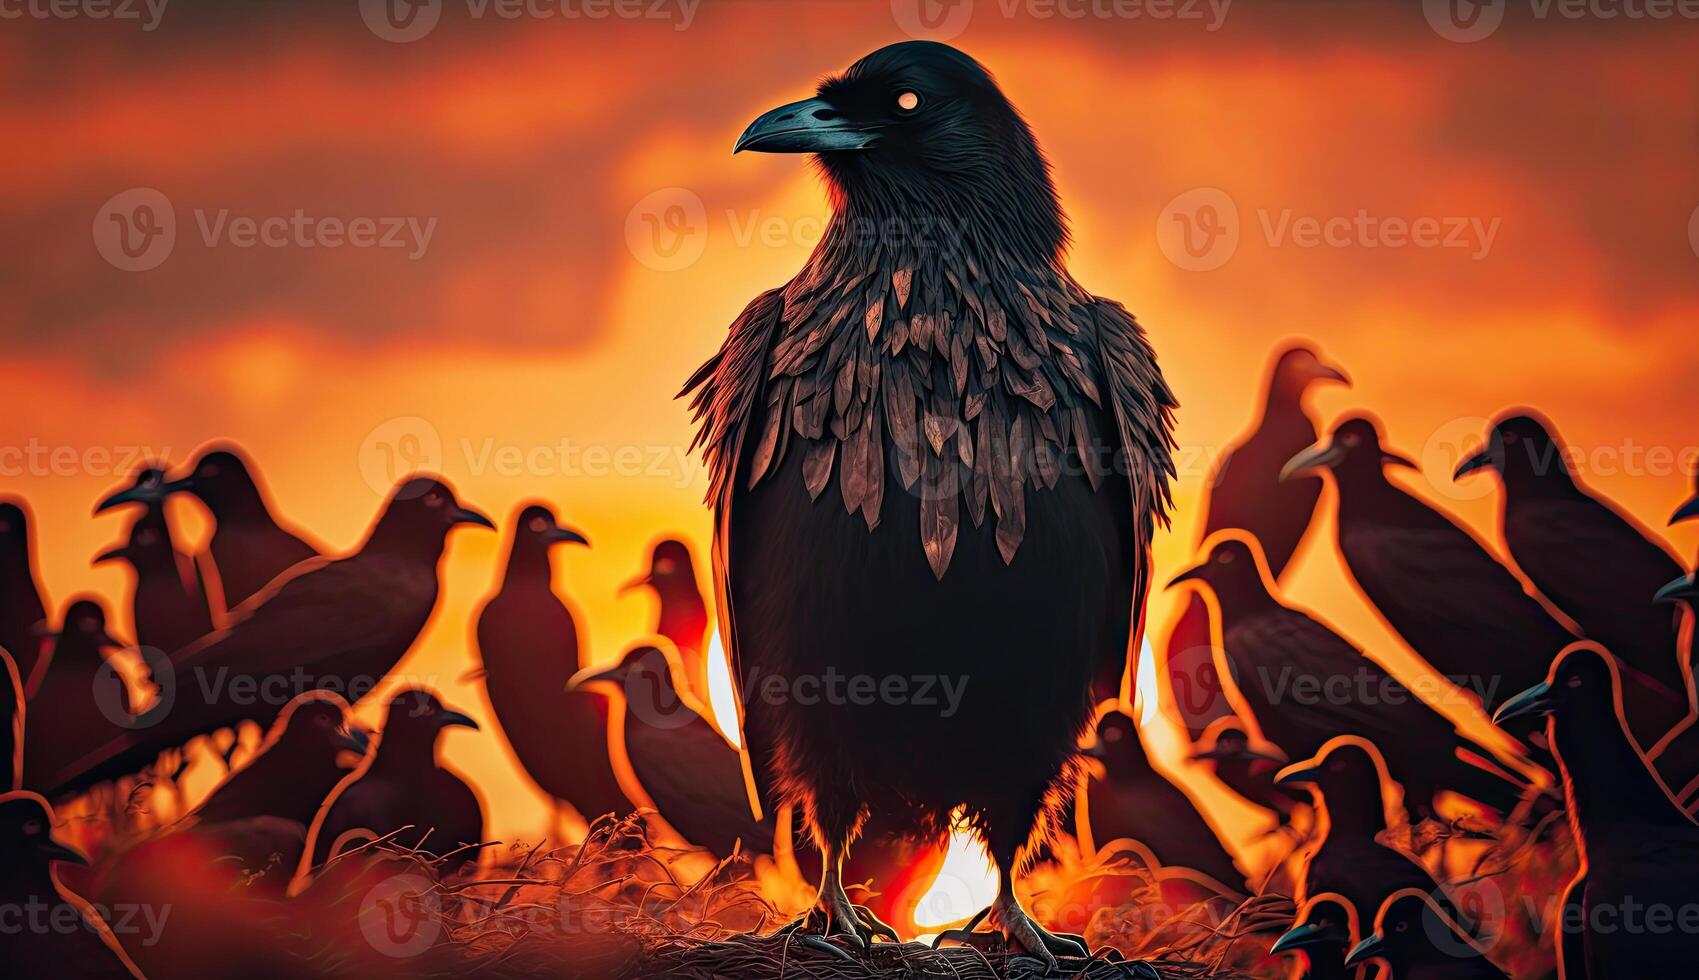 The King of royal black crow standing out between other crows, black birds, nature animals wildlife background, with . photo